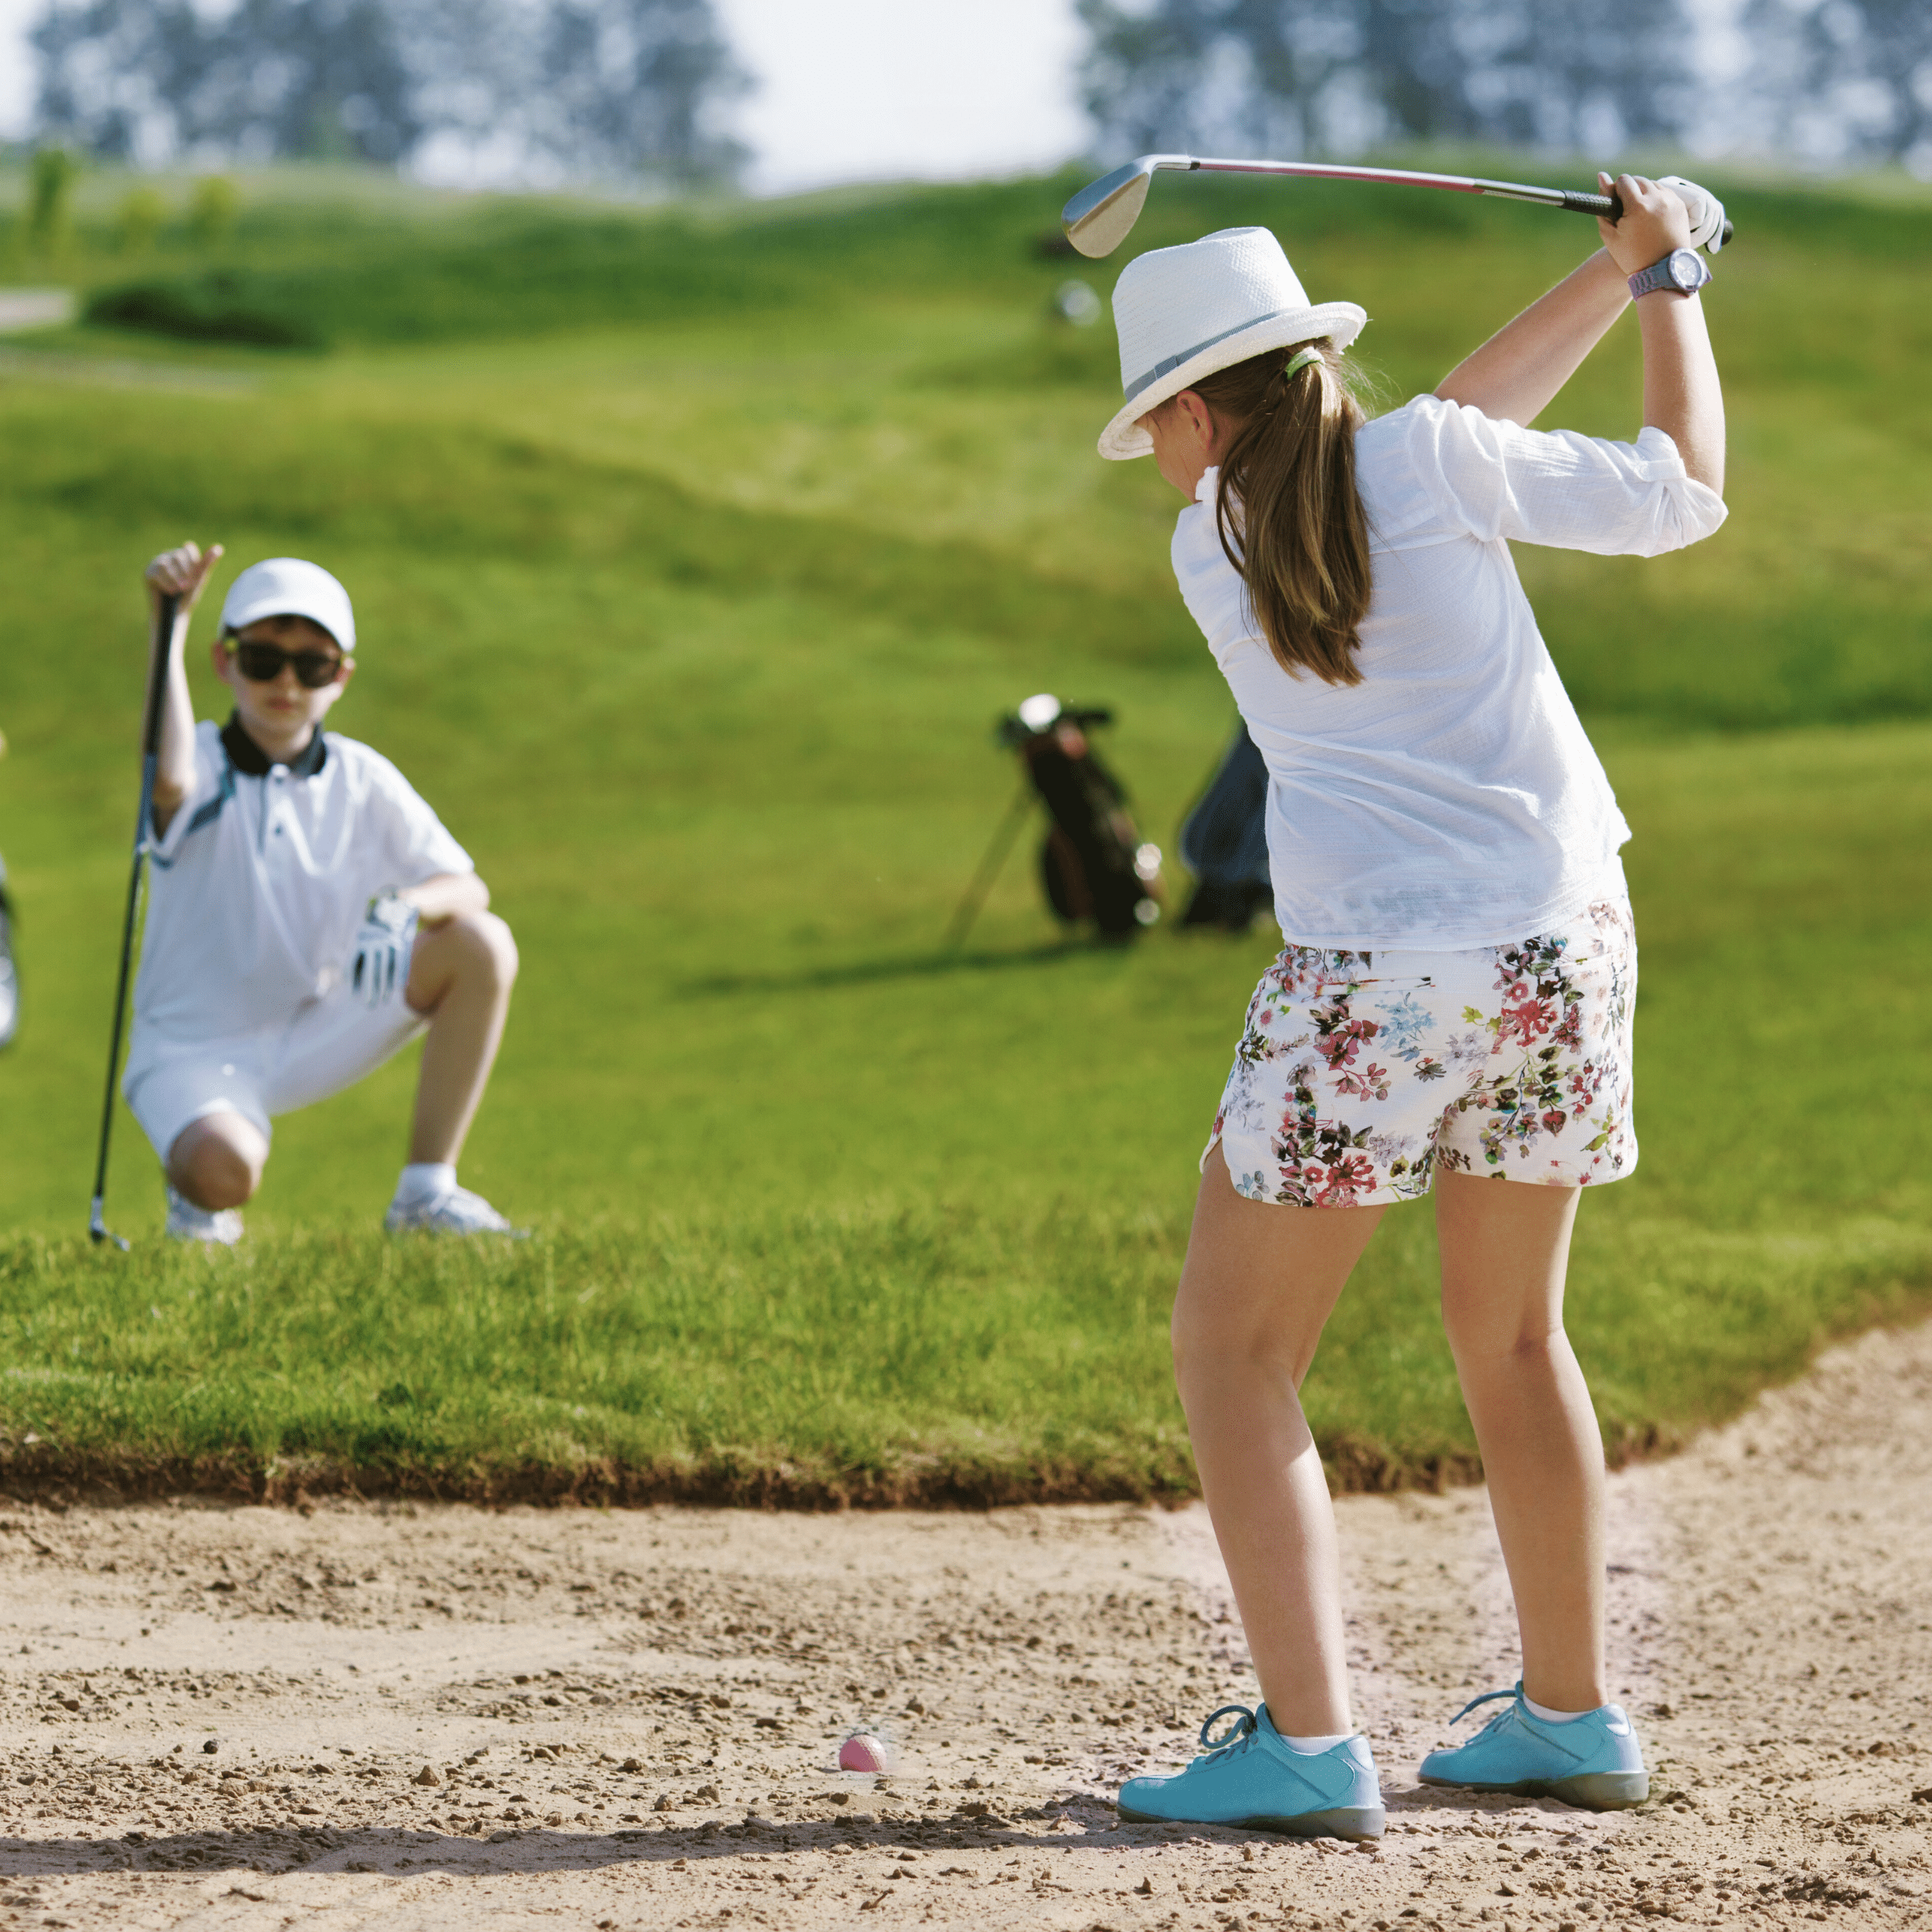 A female child stands in a golf sand bunker facing away. She is holding a golf club aloft and preparing to hit a golf ball. A male child is crouched on the grass in the background watching her shot.